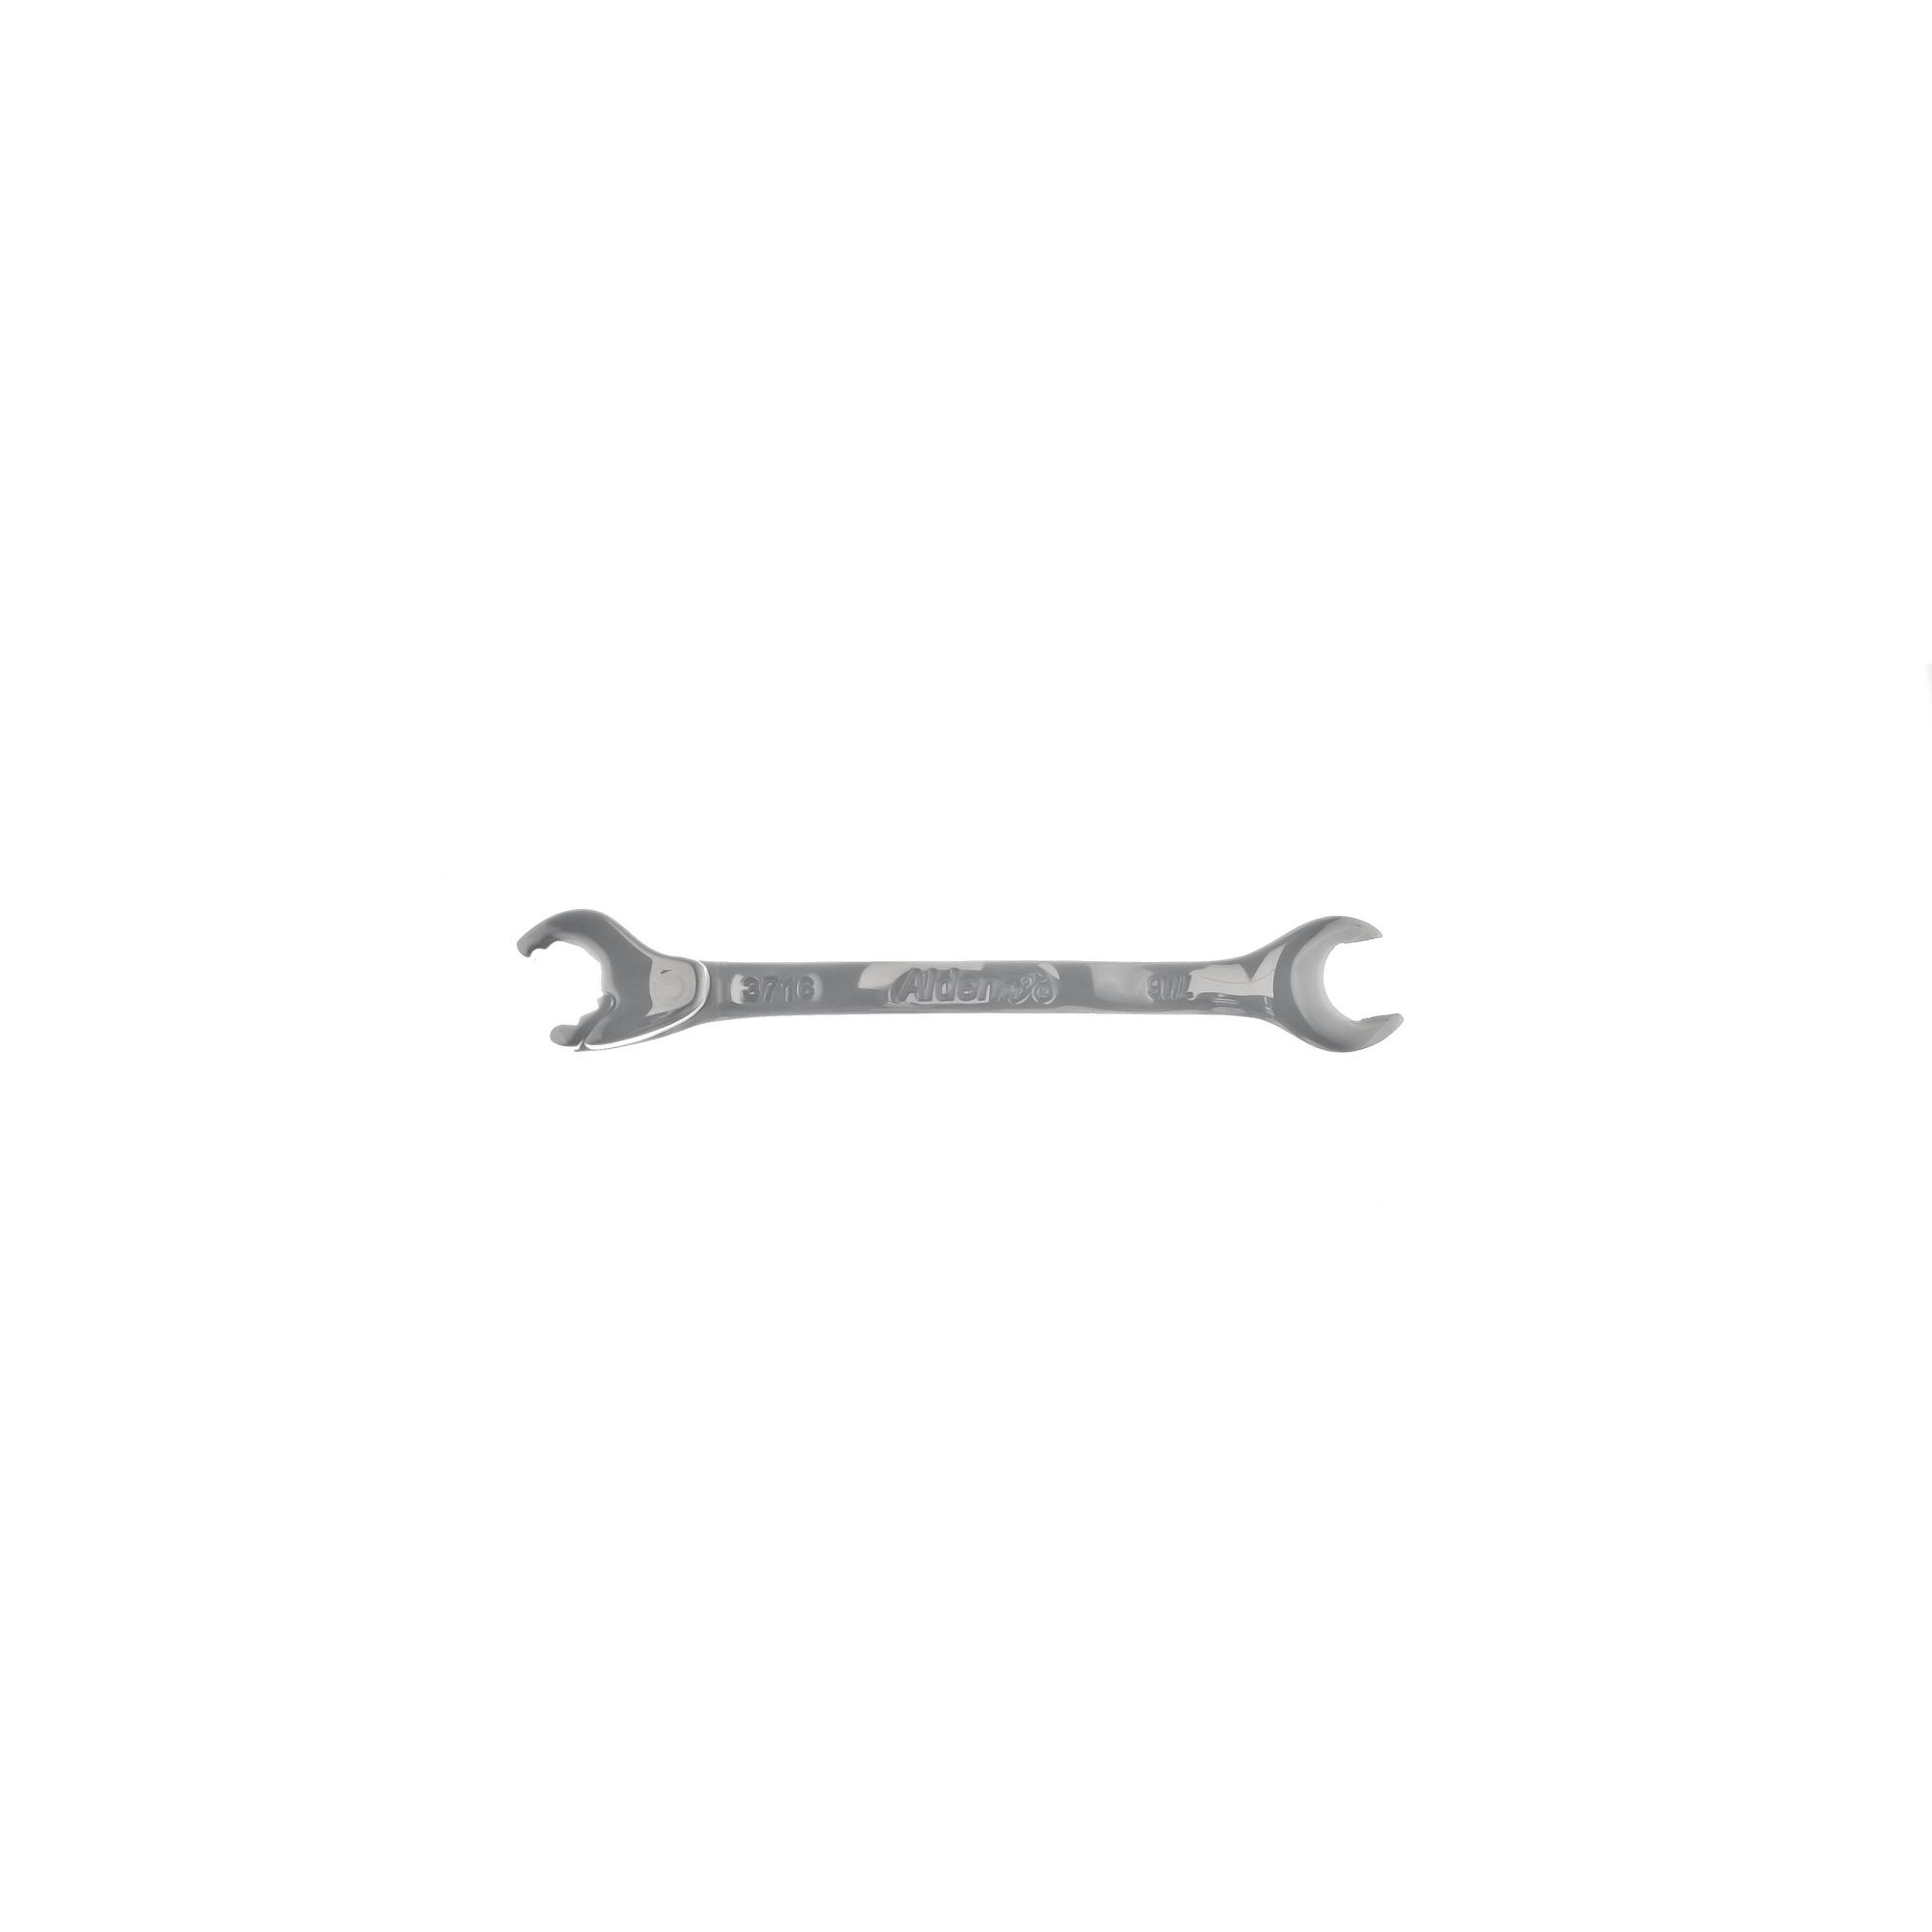 Chicago Brand 7/16" Open-End Ratchet Wrench